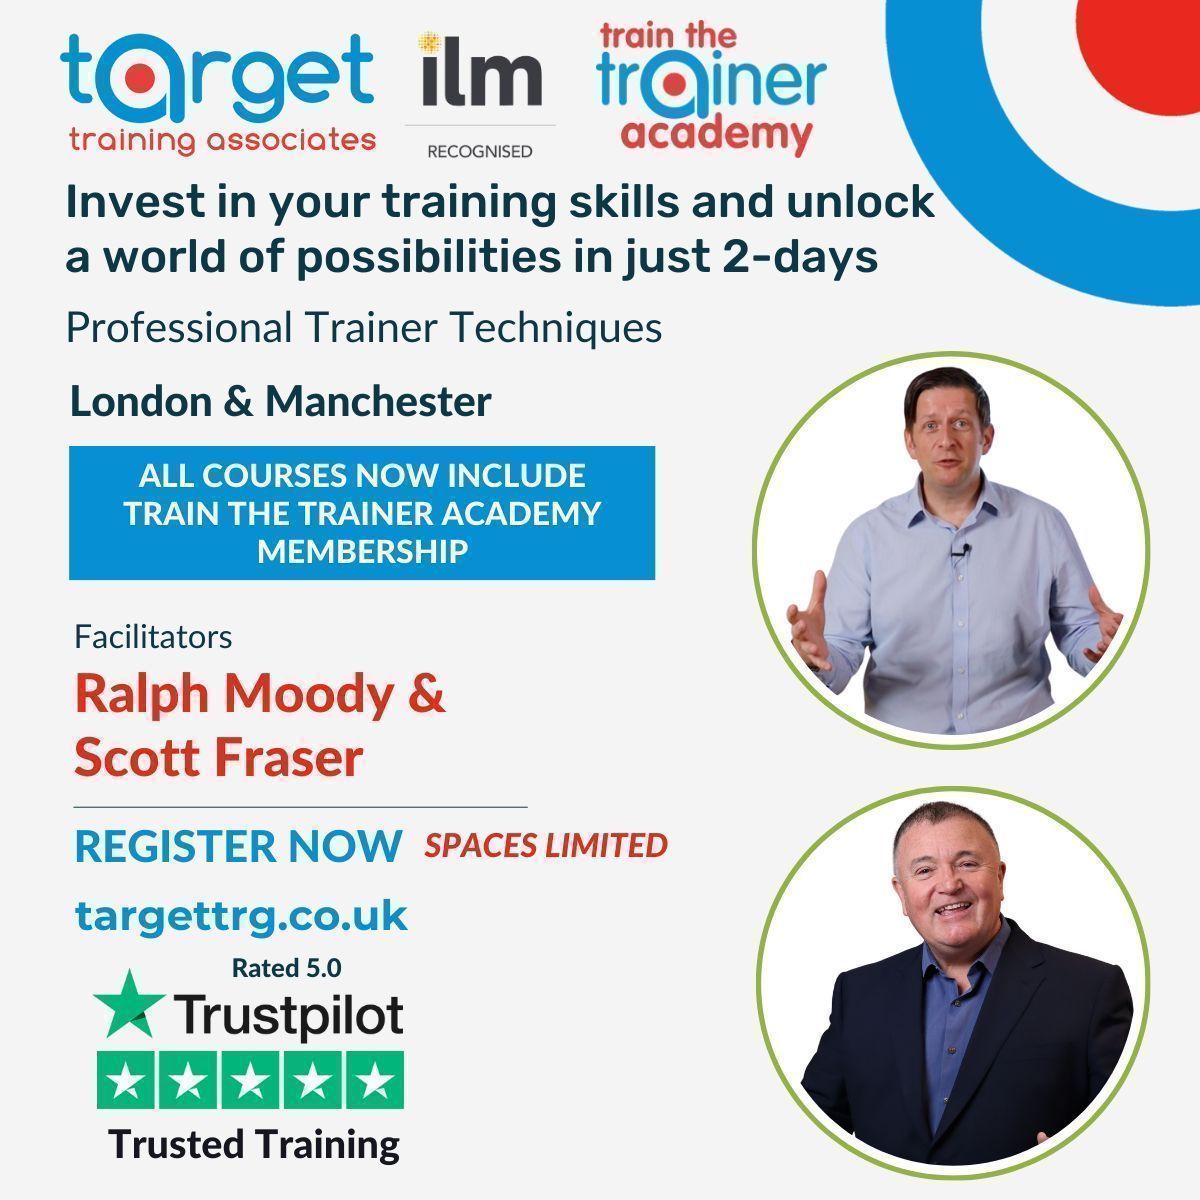 🚀 Ready to level up your training game?
Our Train the Trainer courses in #Manchester #London are the ultimate game-changers! 
Gain practical skills, boost confidence, & become a dynamic trainer. 
Limited places available, book now: buff.ly/42GB1GZ  💼✨ 
#TrainTheTrainer